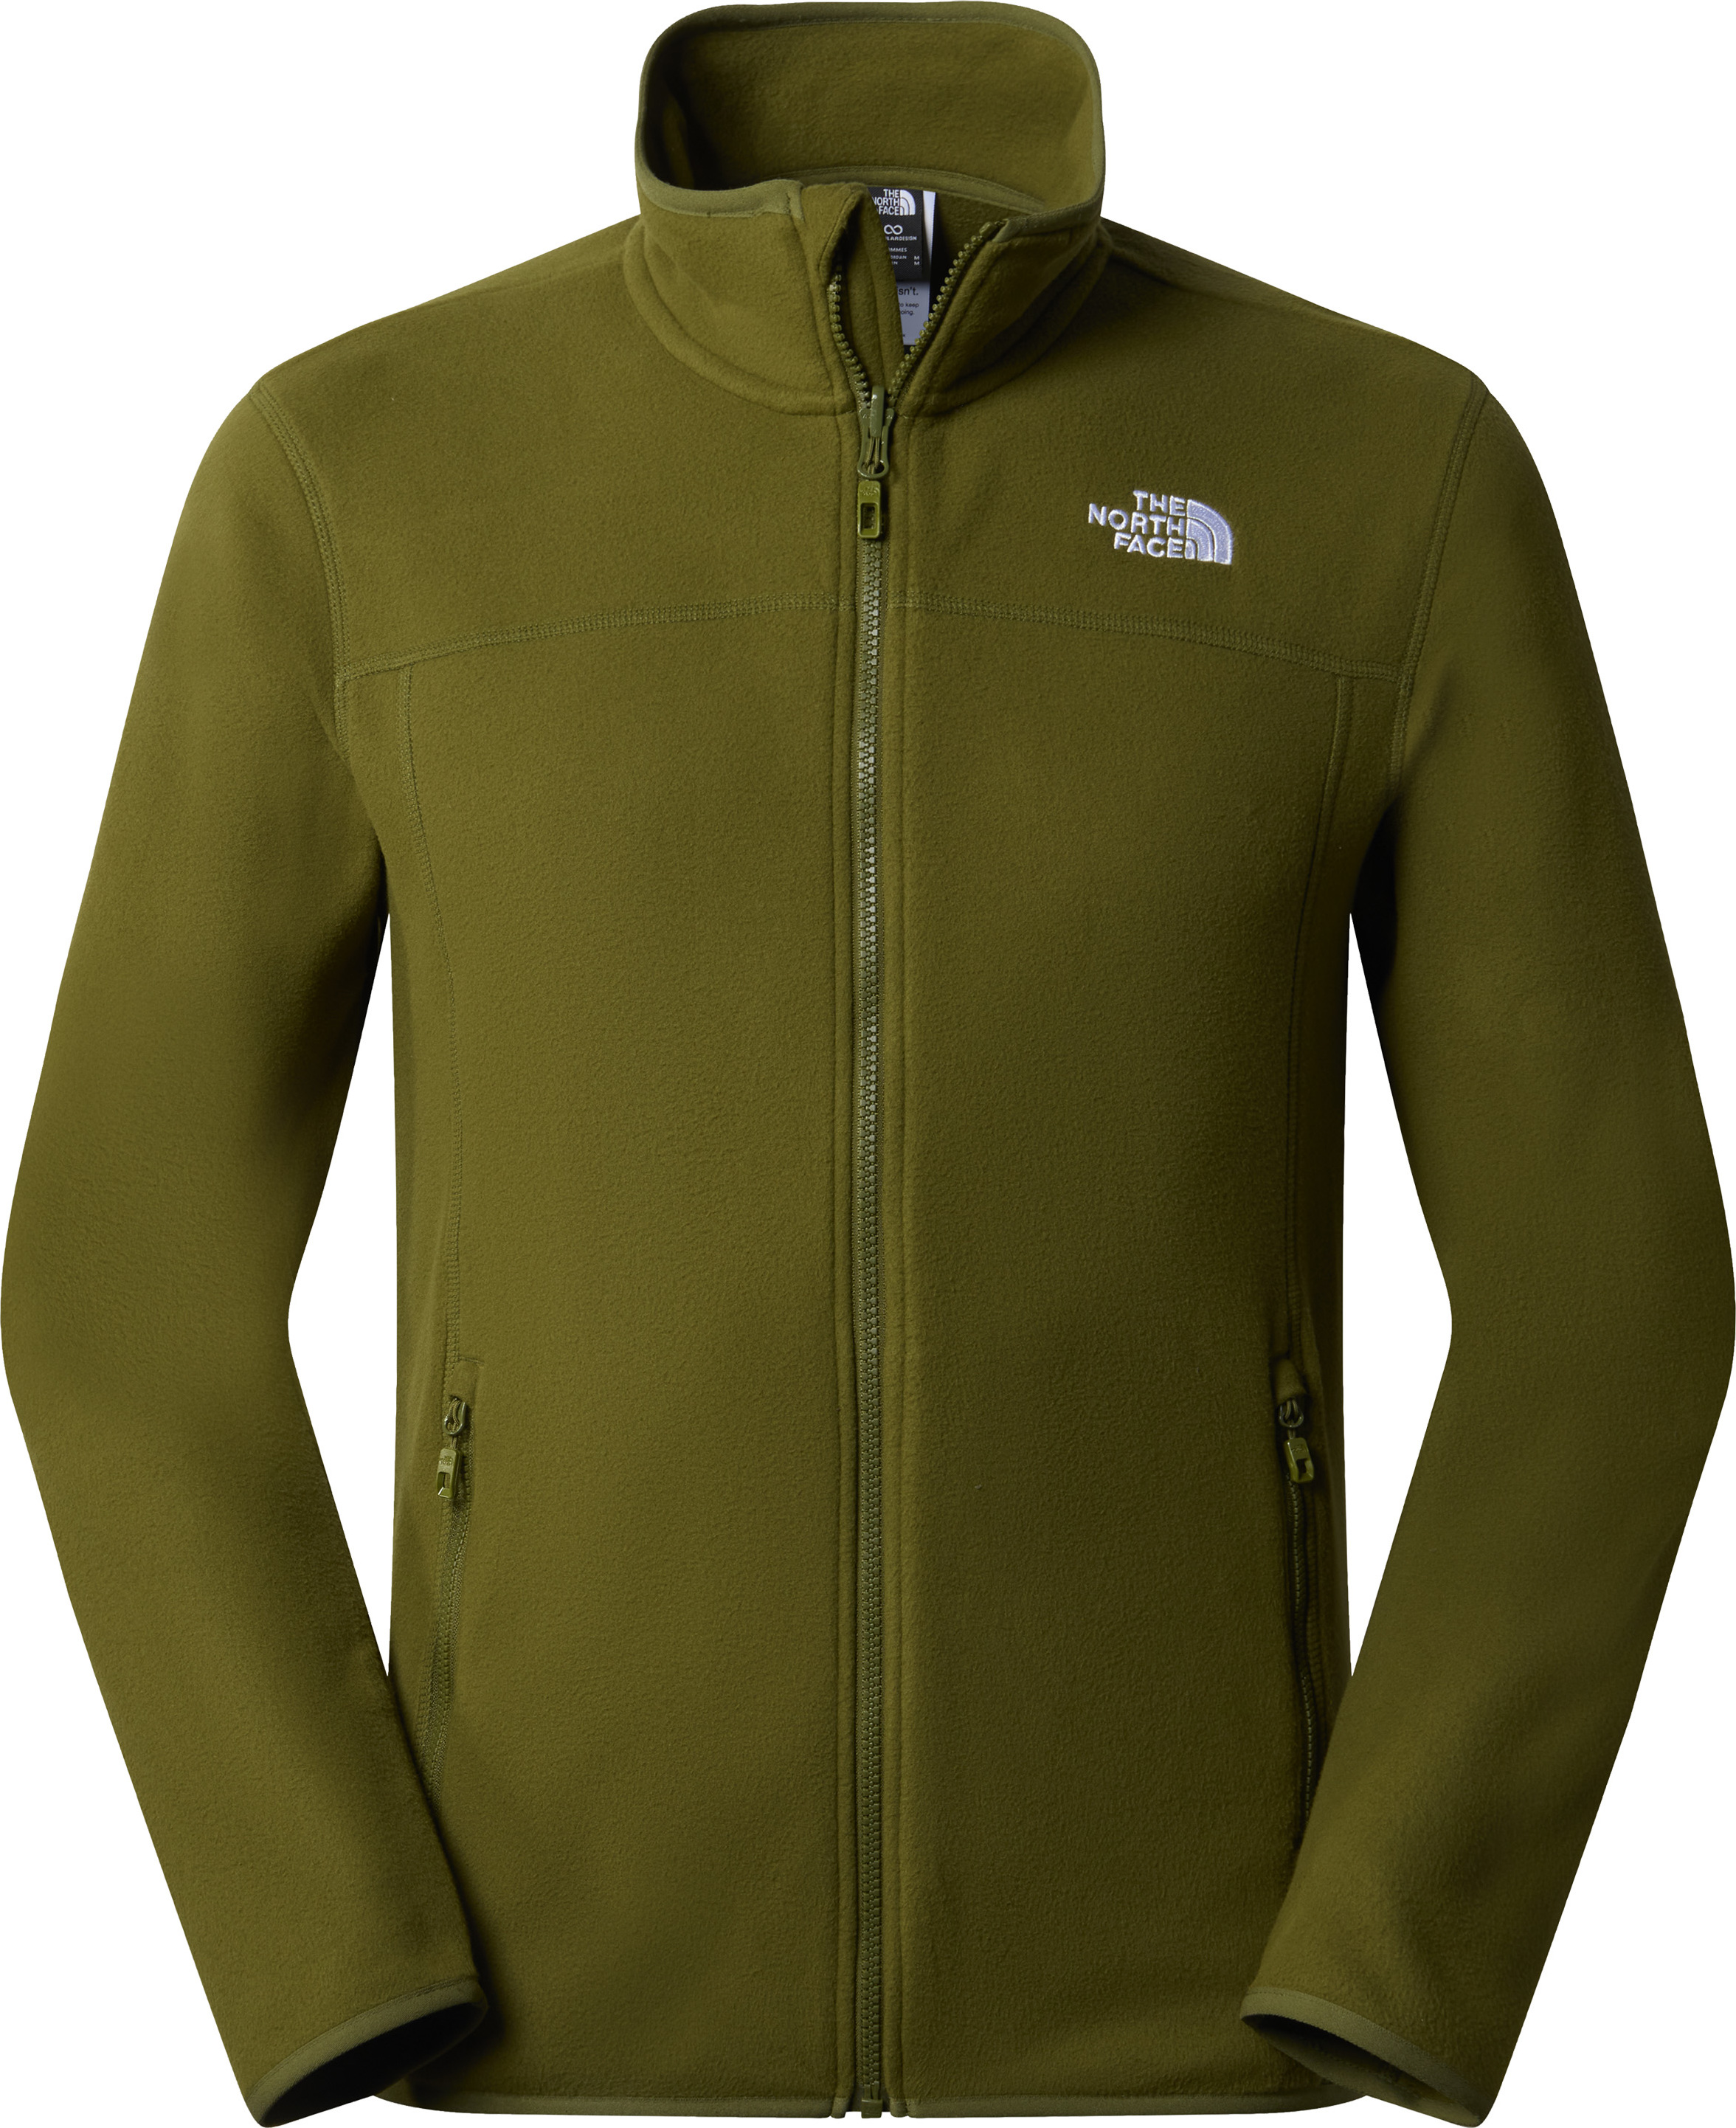 The North Face The North Face Men's 100 Glacier Full-Zip Fleece Forest Olive L, Forest Olive